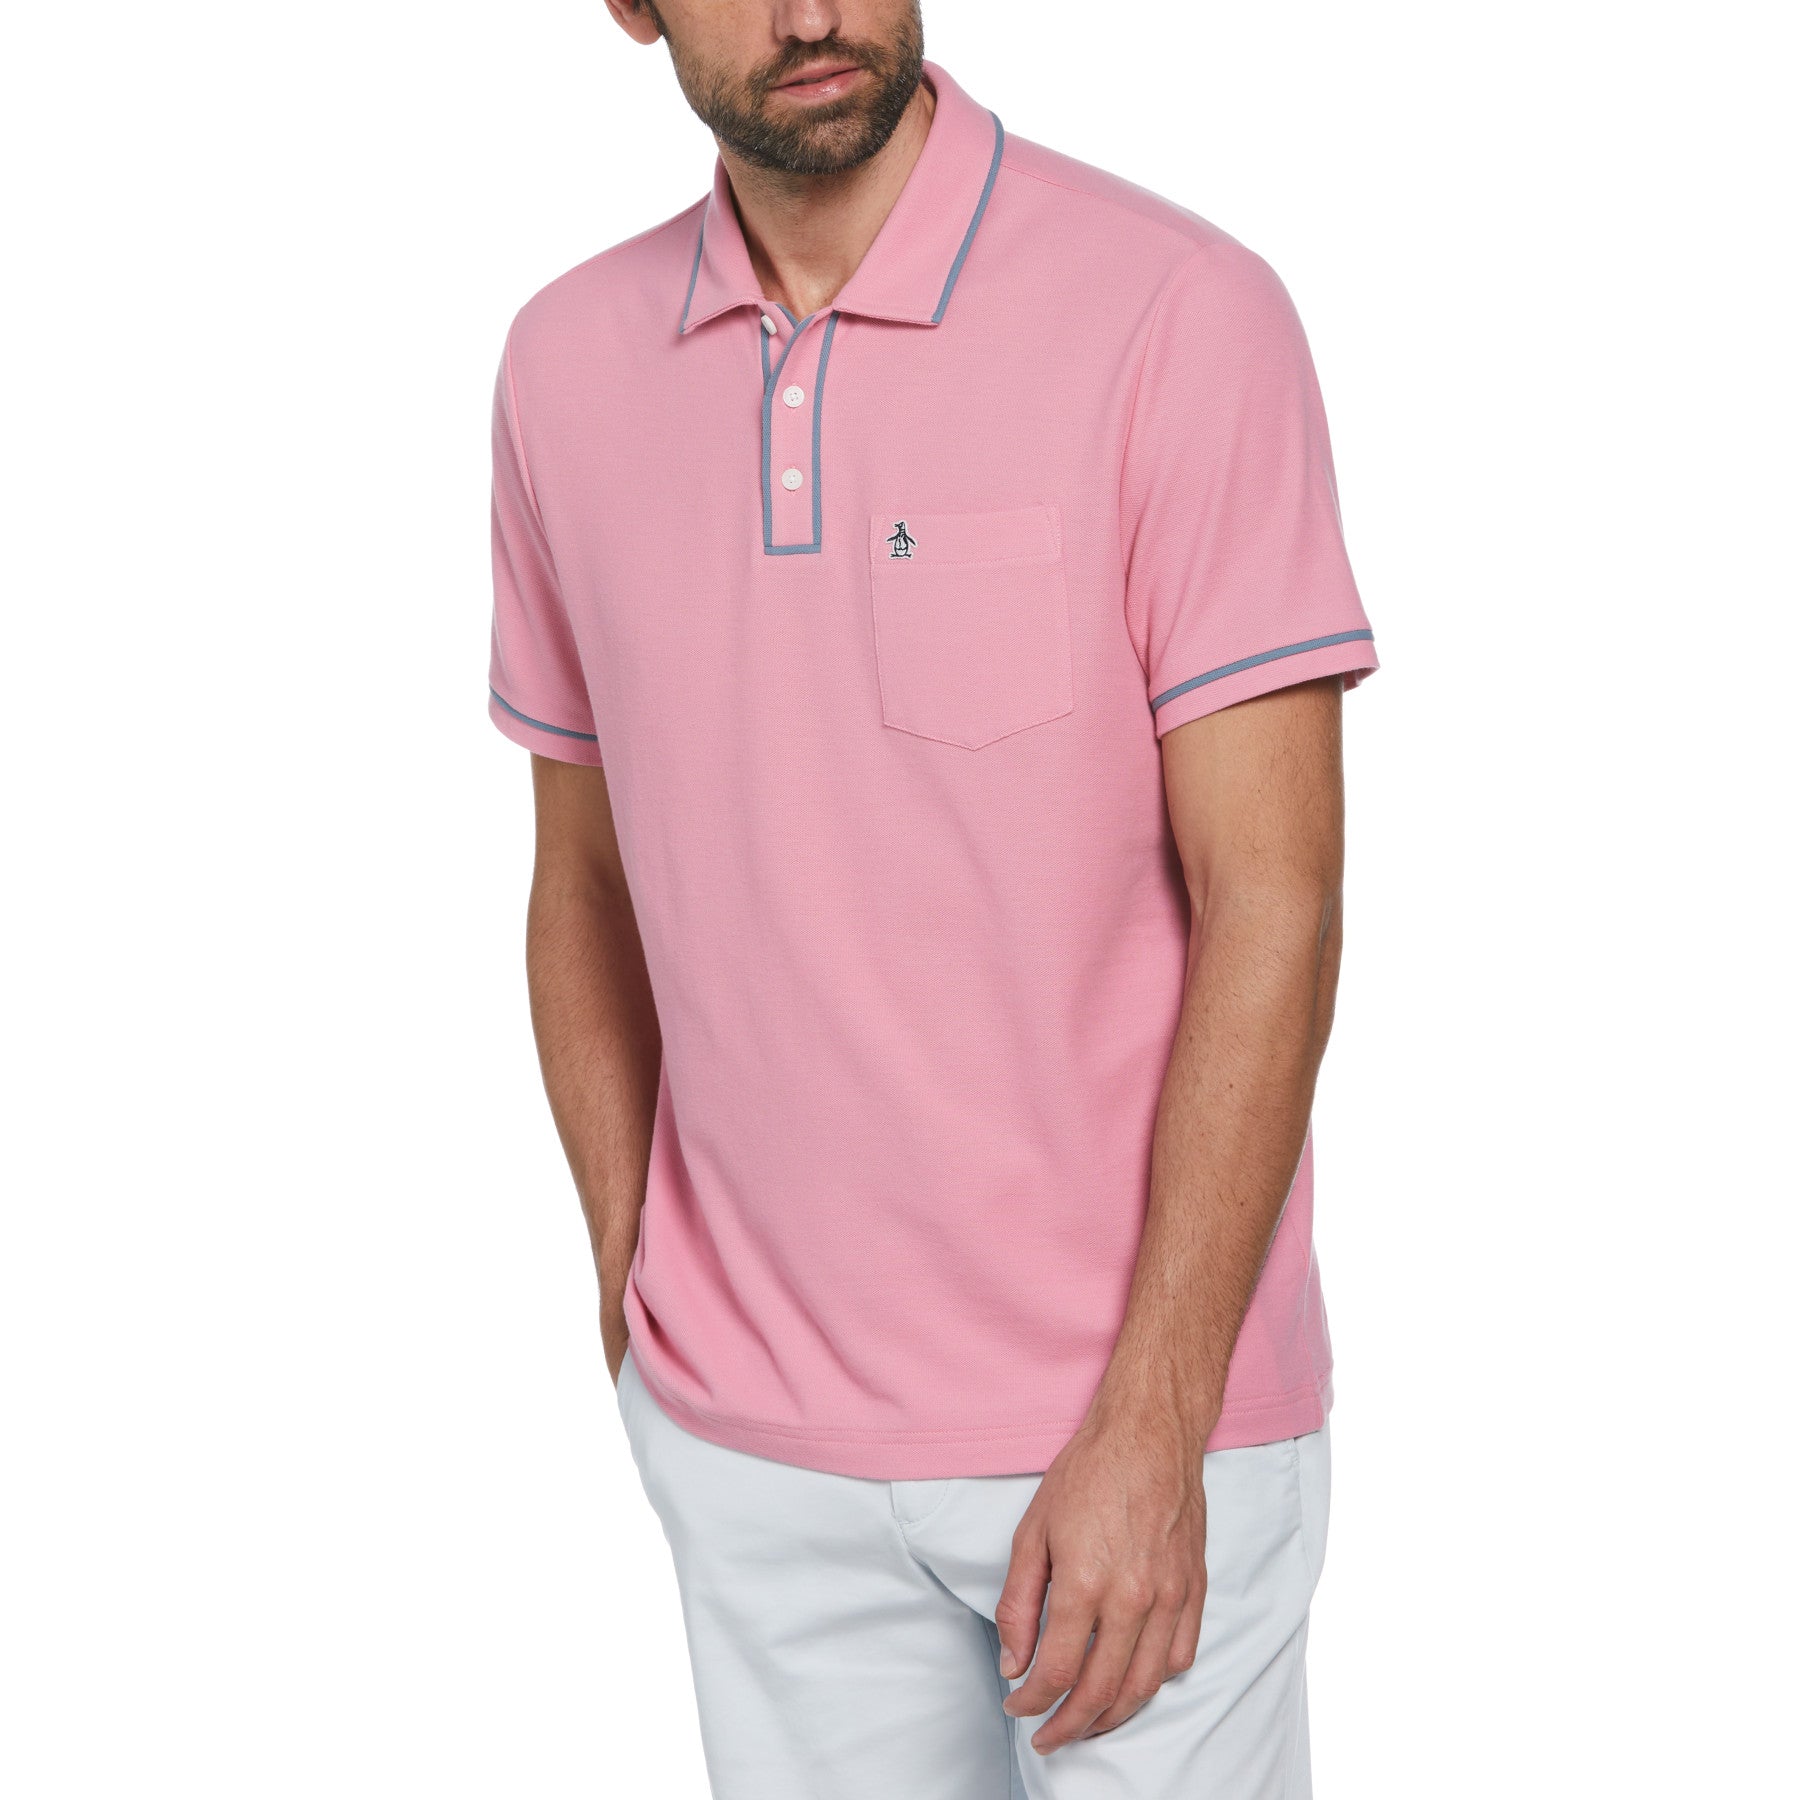 View Original Penguin Organic Cotton The Earl Pique Short Sleeve Polo Shirt In Wild Rose Pink Mens information